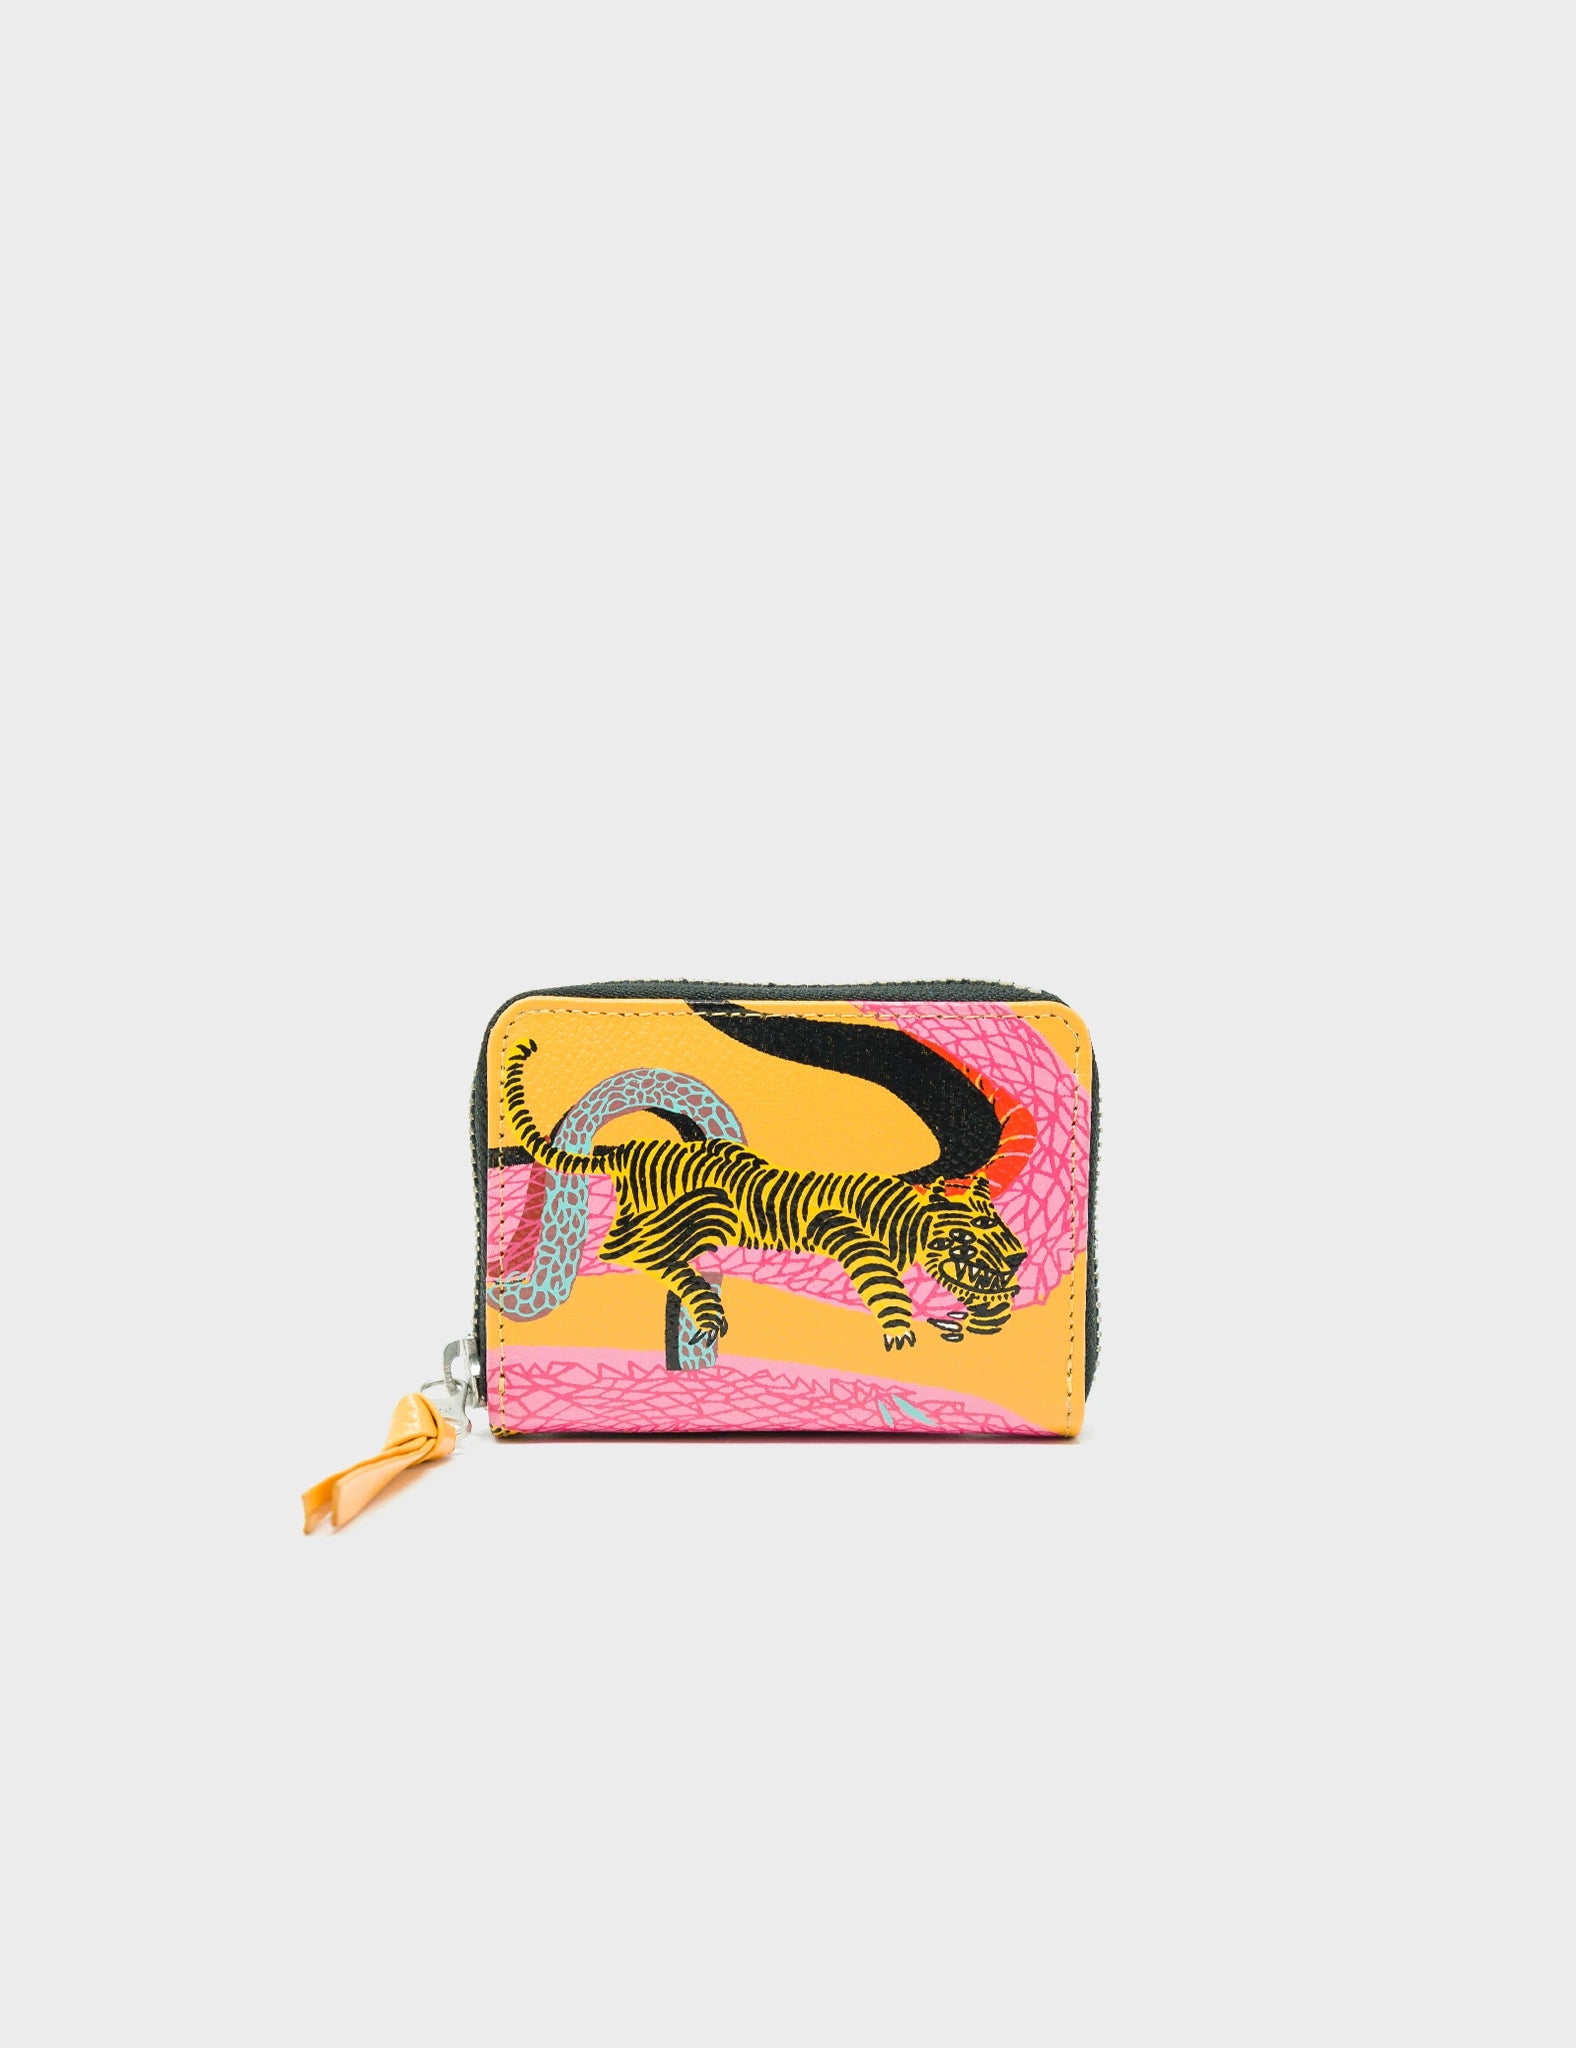 Frodo Marigold Leather Zip Around Wallet - Tangle and Snake Print